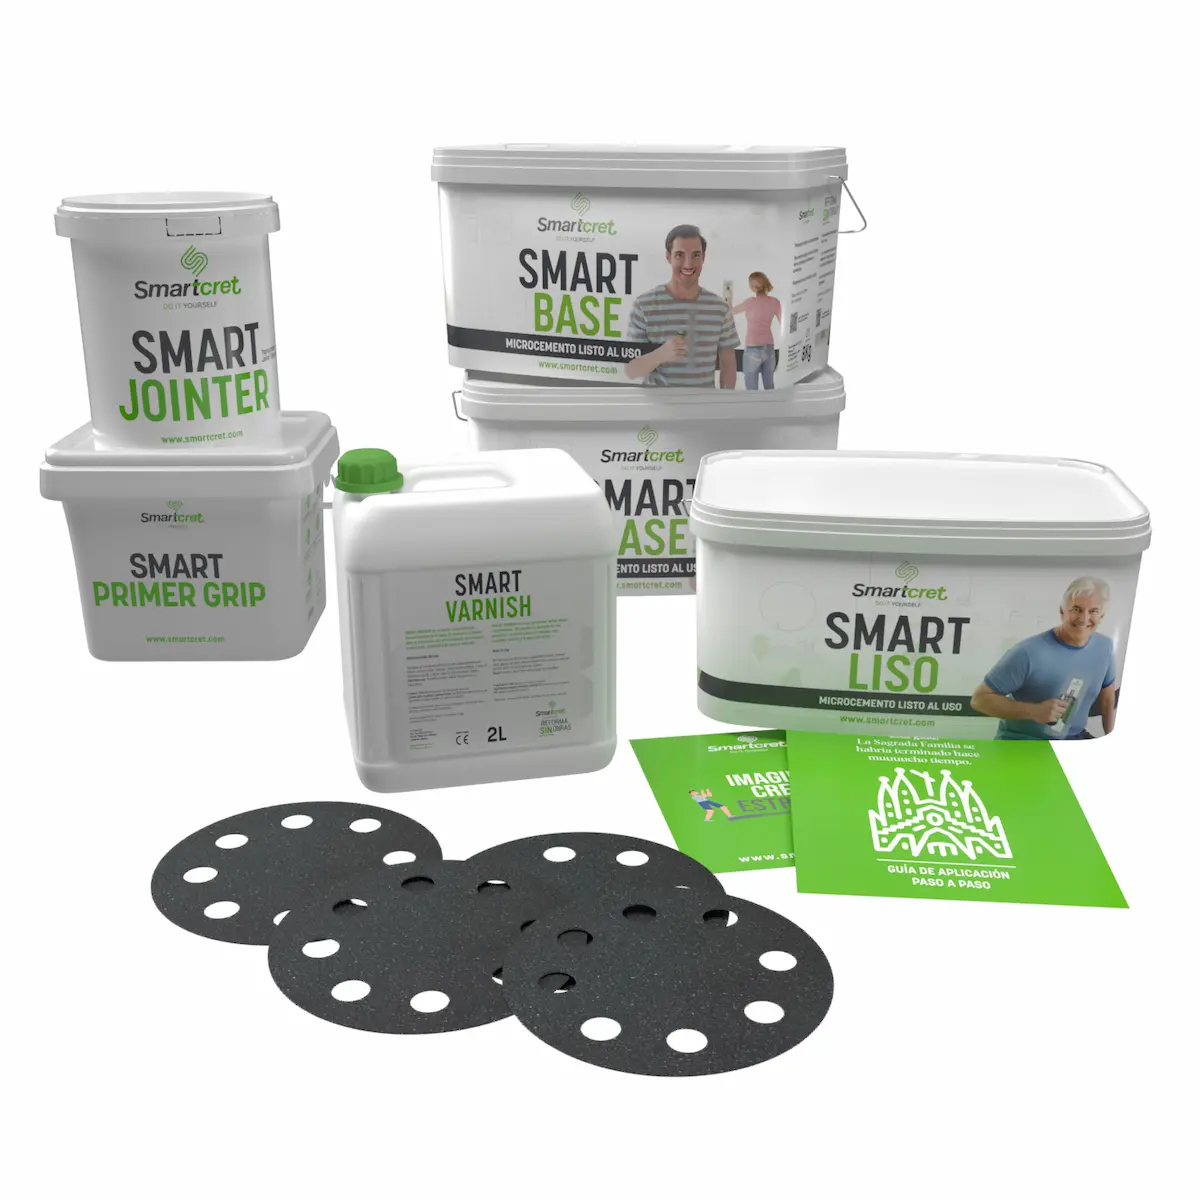 Smart Kit Non-absorbent surfaces